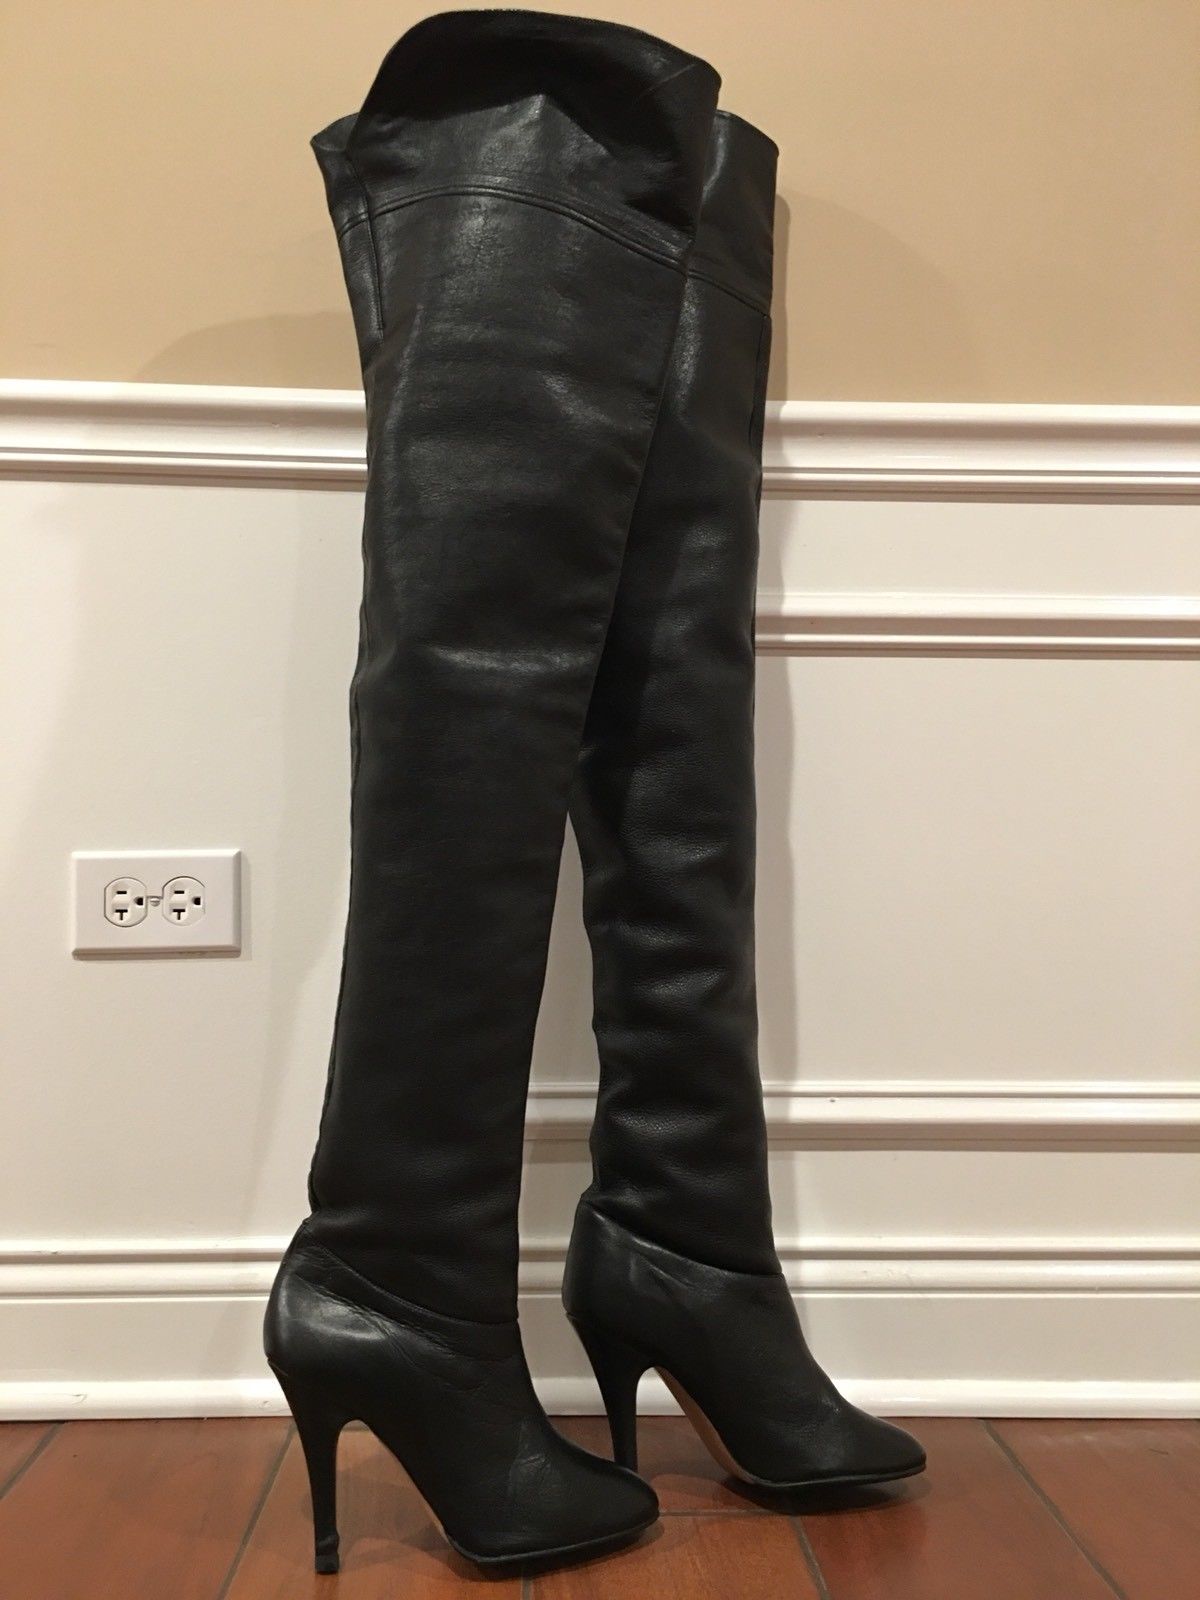 eBay Leather: Another pair of Wild Pair black leather crotch-high boots